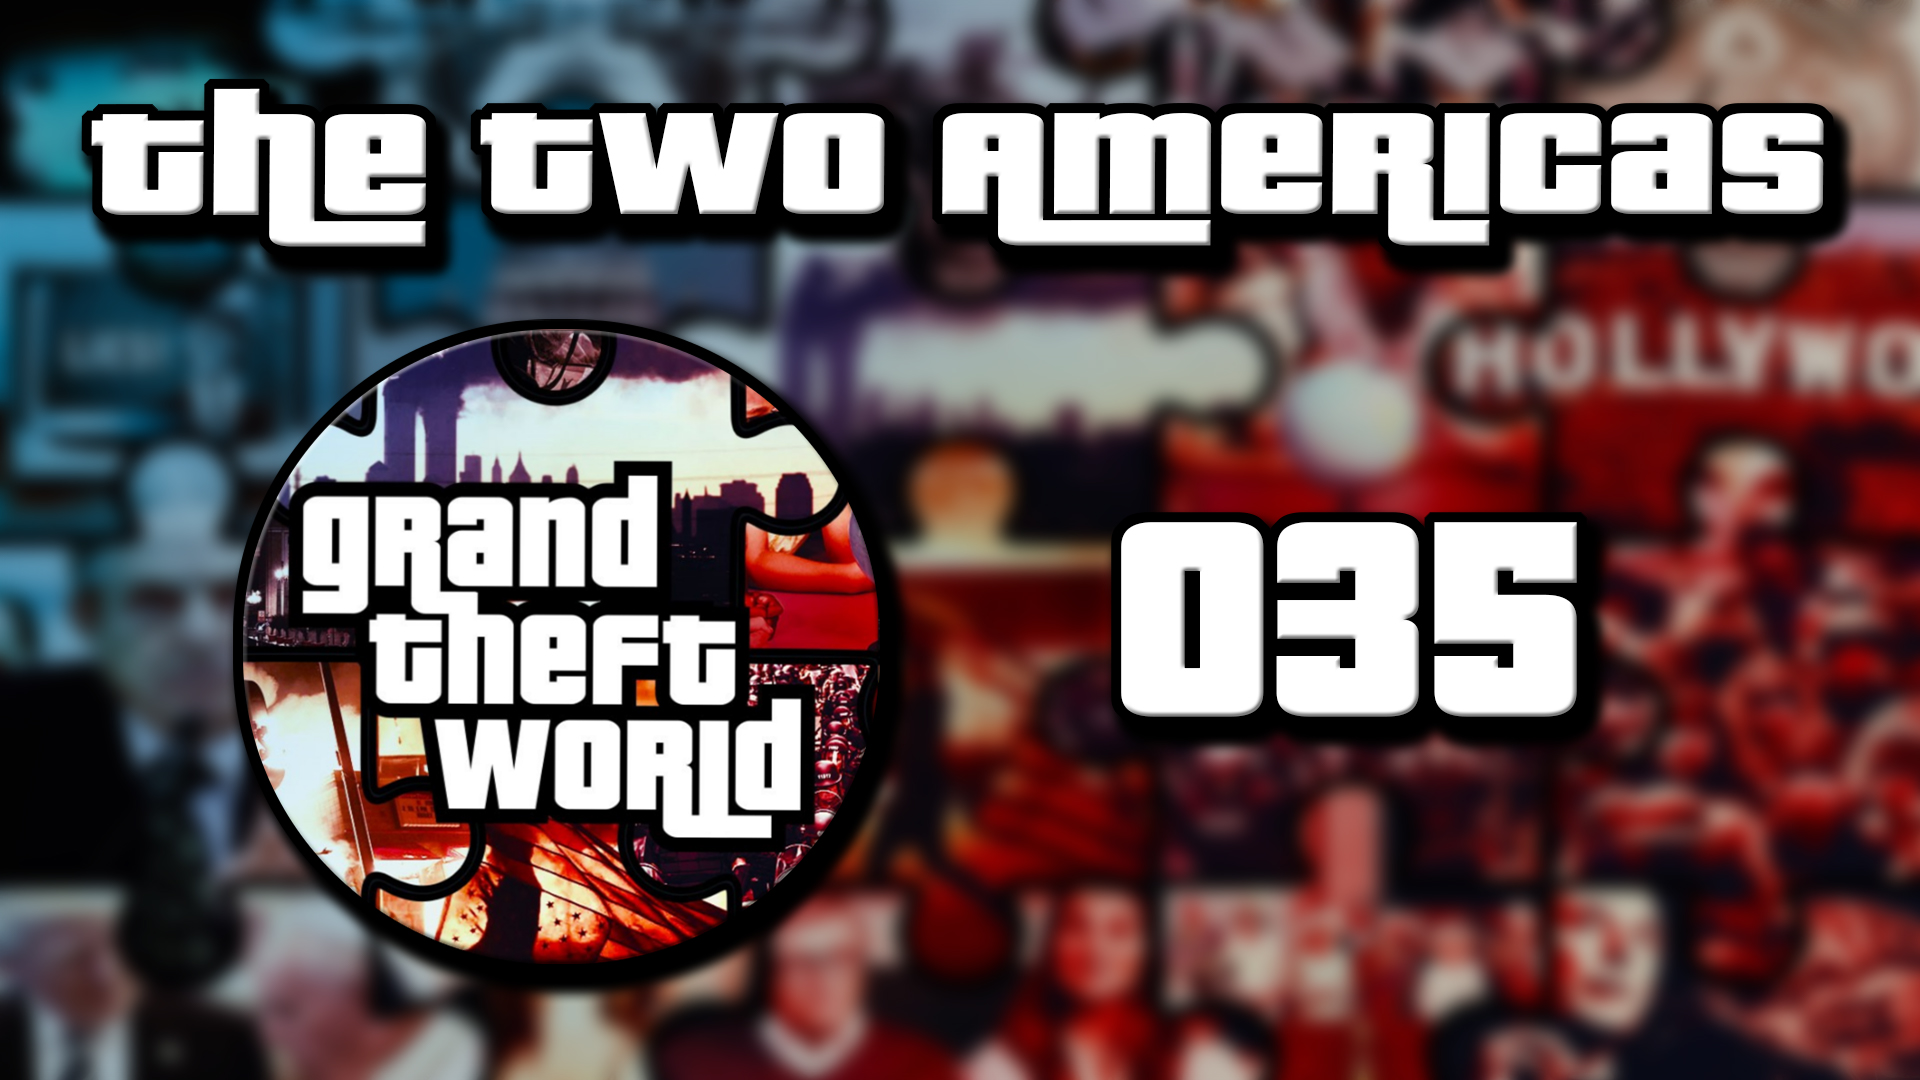 Grand Theft World Podcast 035 | The Two Americas